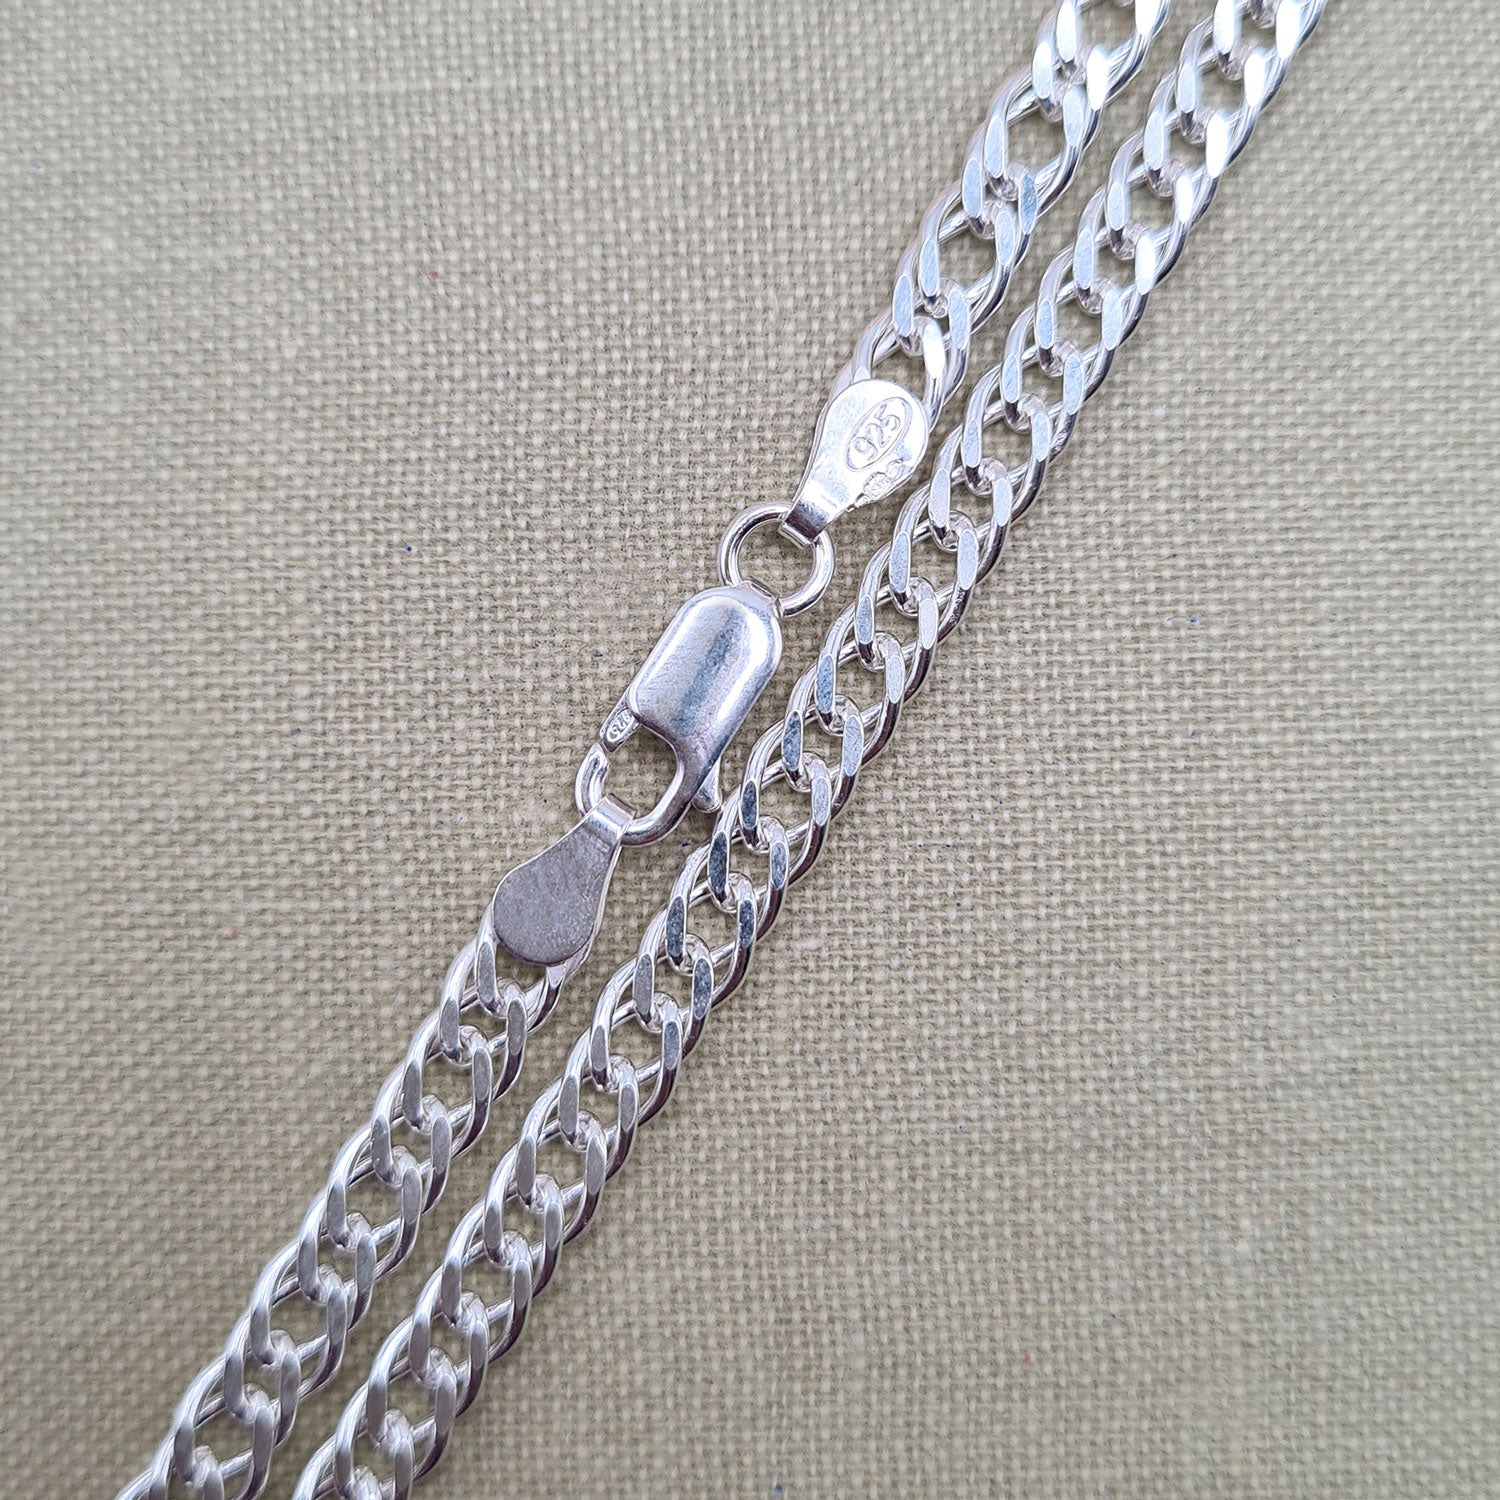 4mm Double Curb Chain Necklace in Sterling Silver